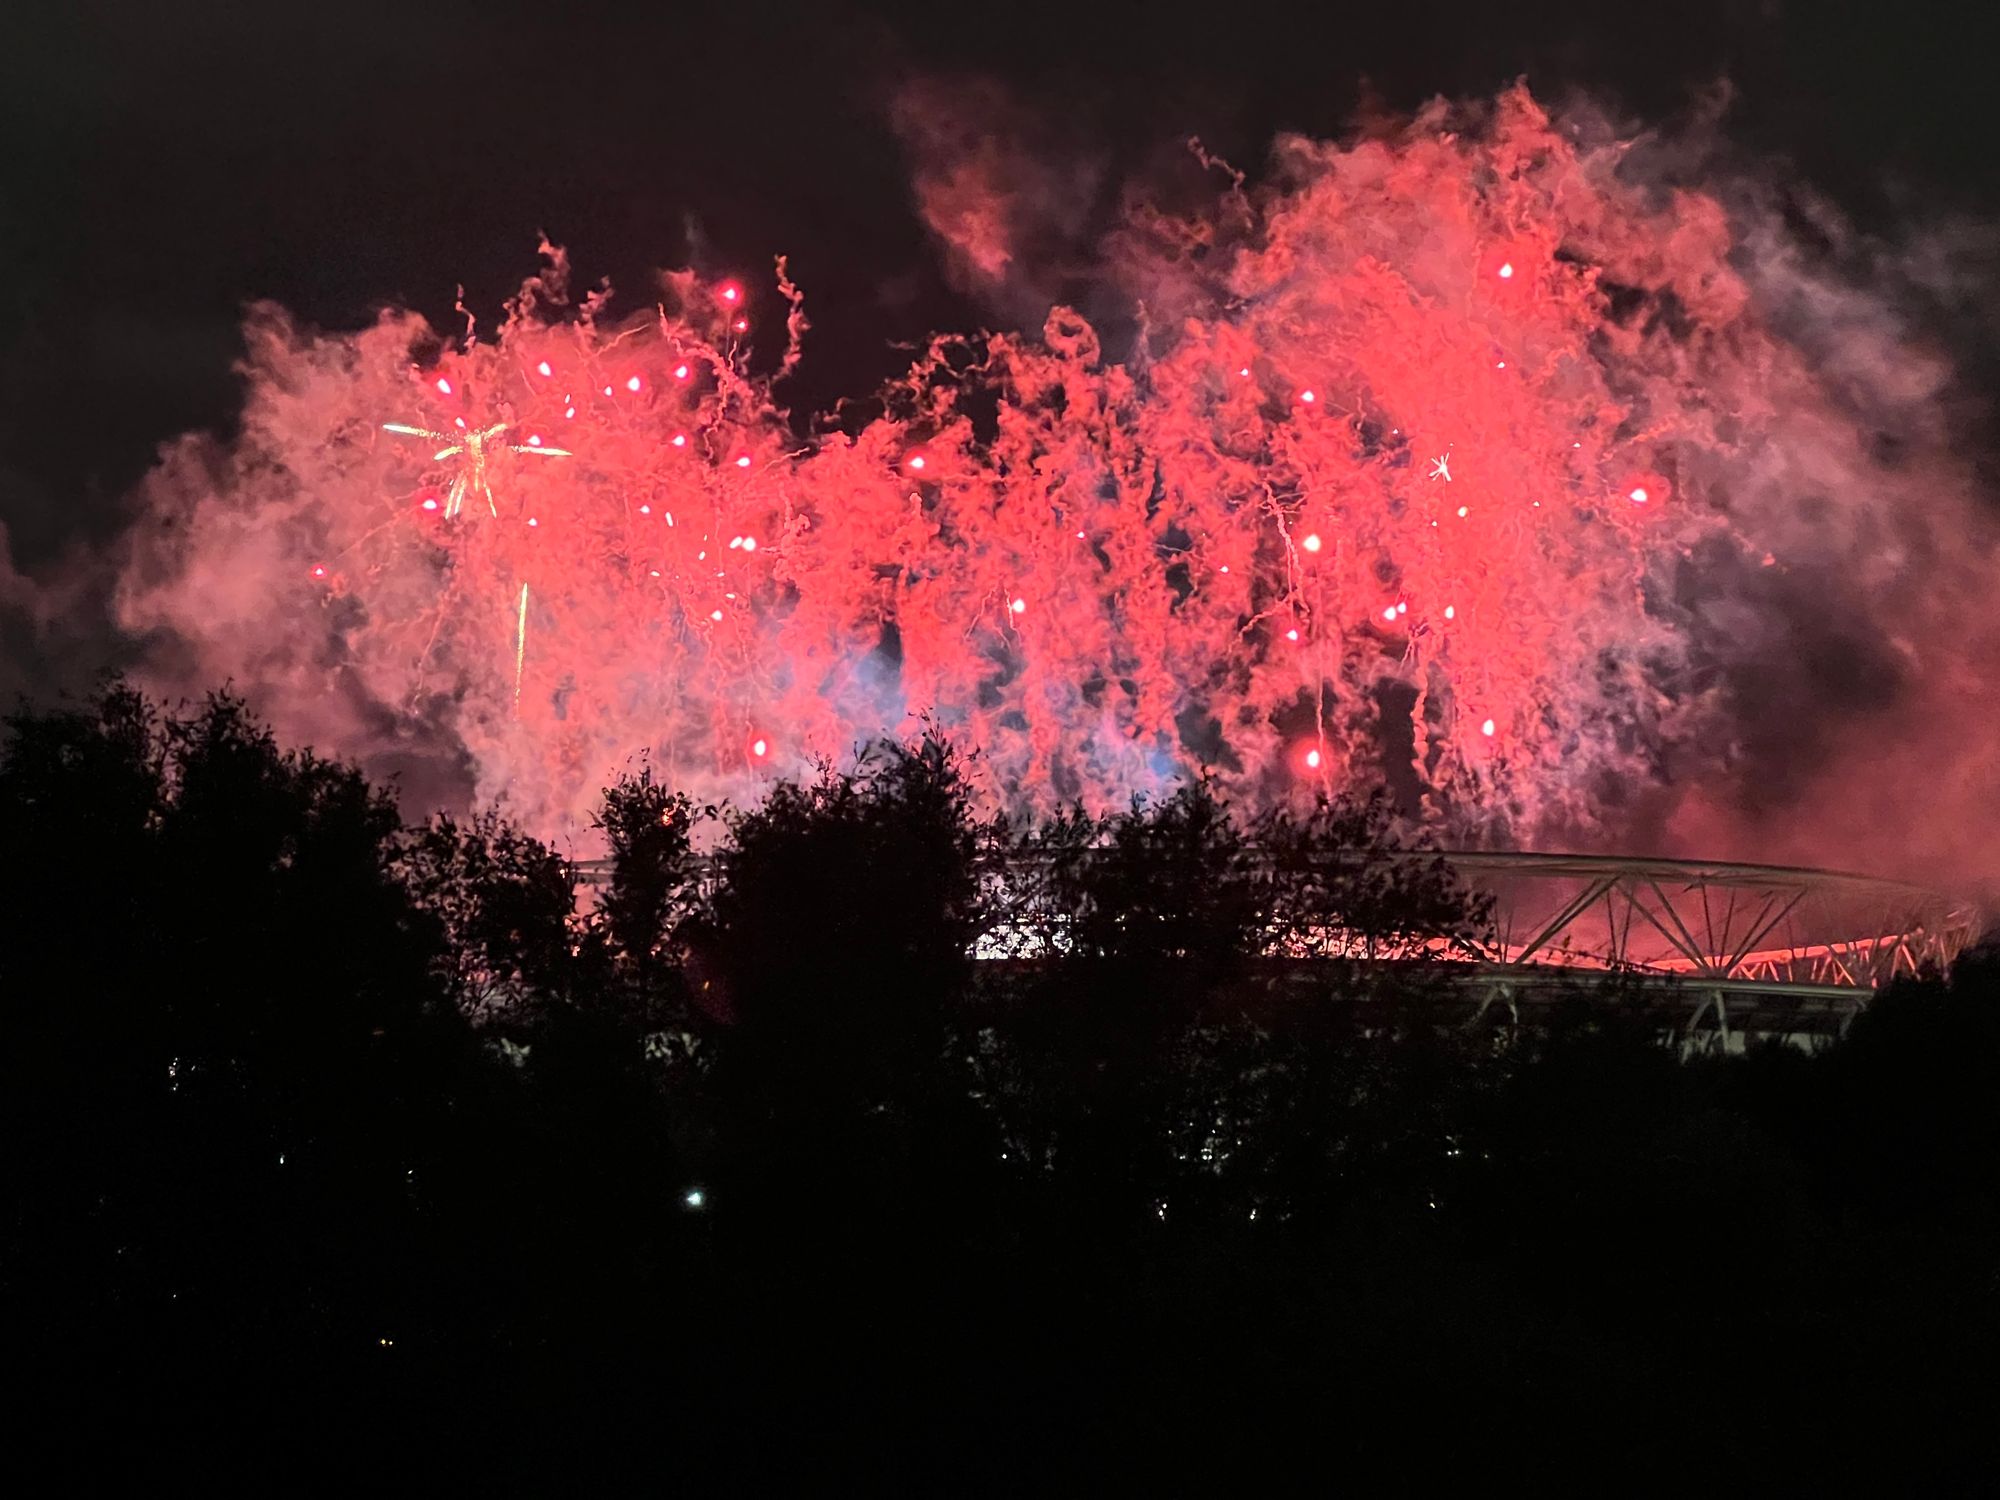 The London Stadium at night in silhouette, with red pyrotechnics above it lighting smoke from previous explosions.